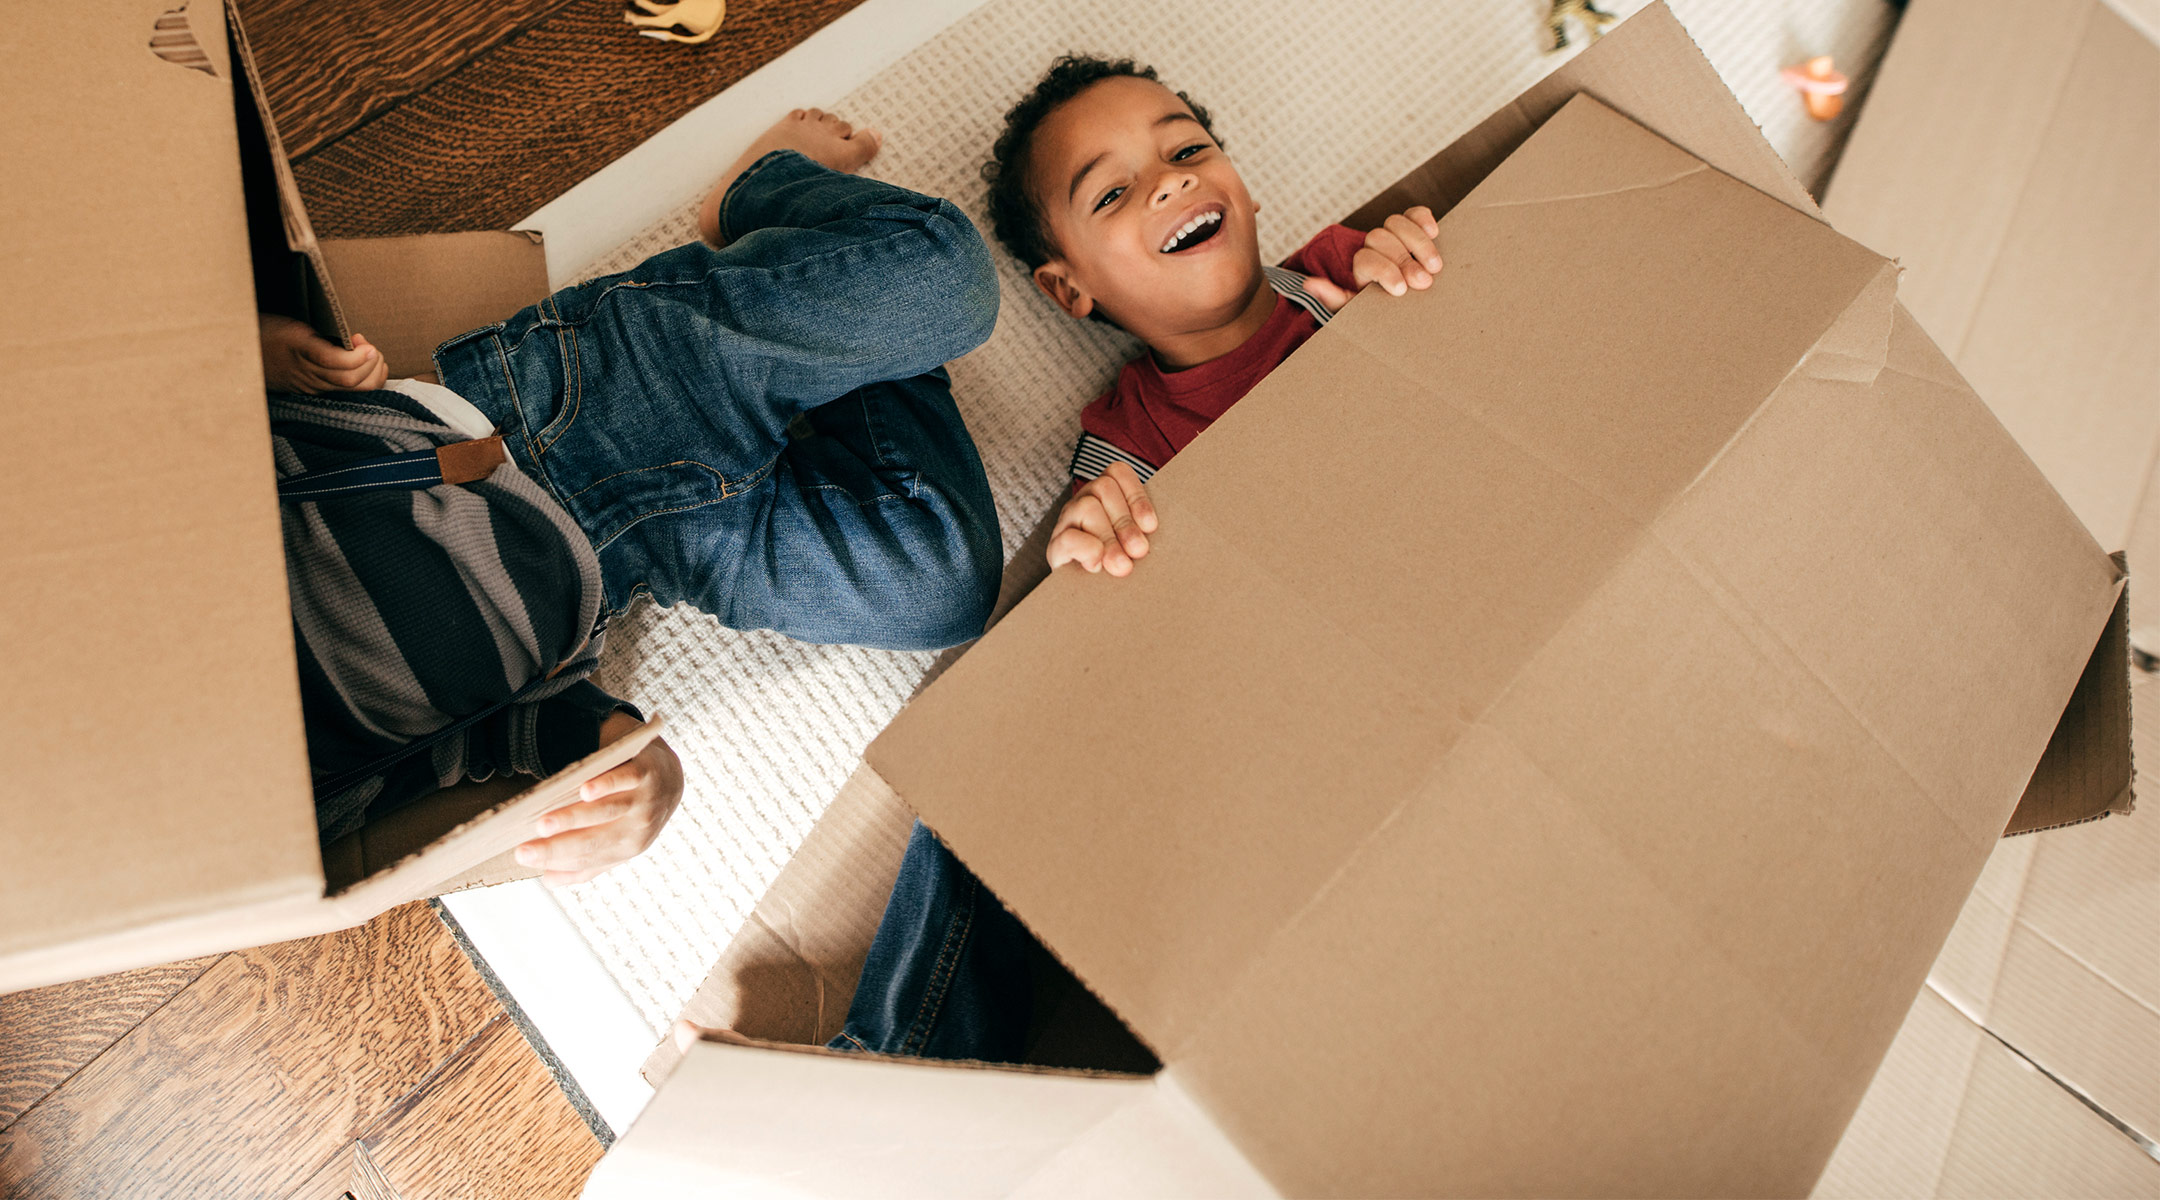 children prefer and have more fun playing with cardboard box